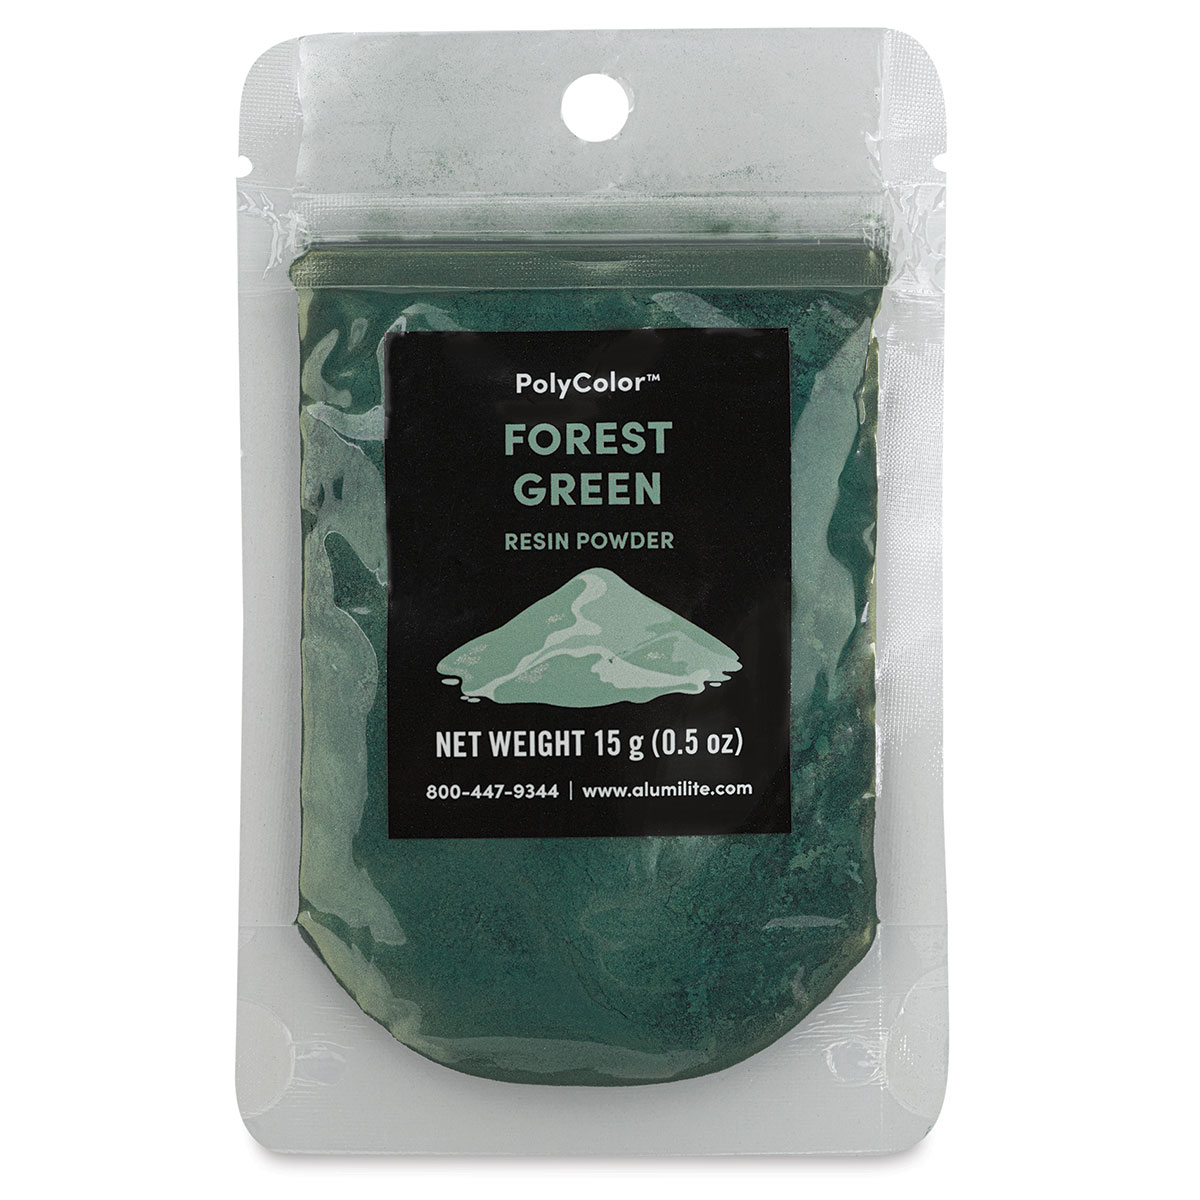 PolyColor Resin Pigment Powder - Forest Green, 15 g | BLICK Art Materials